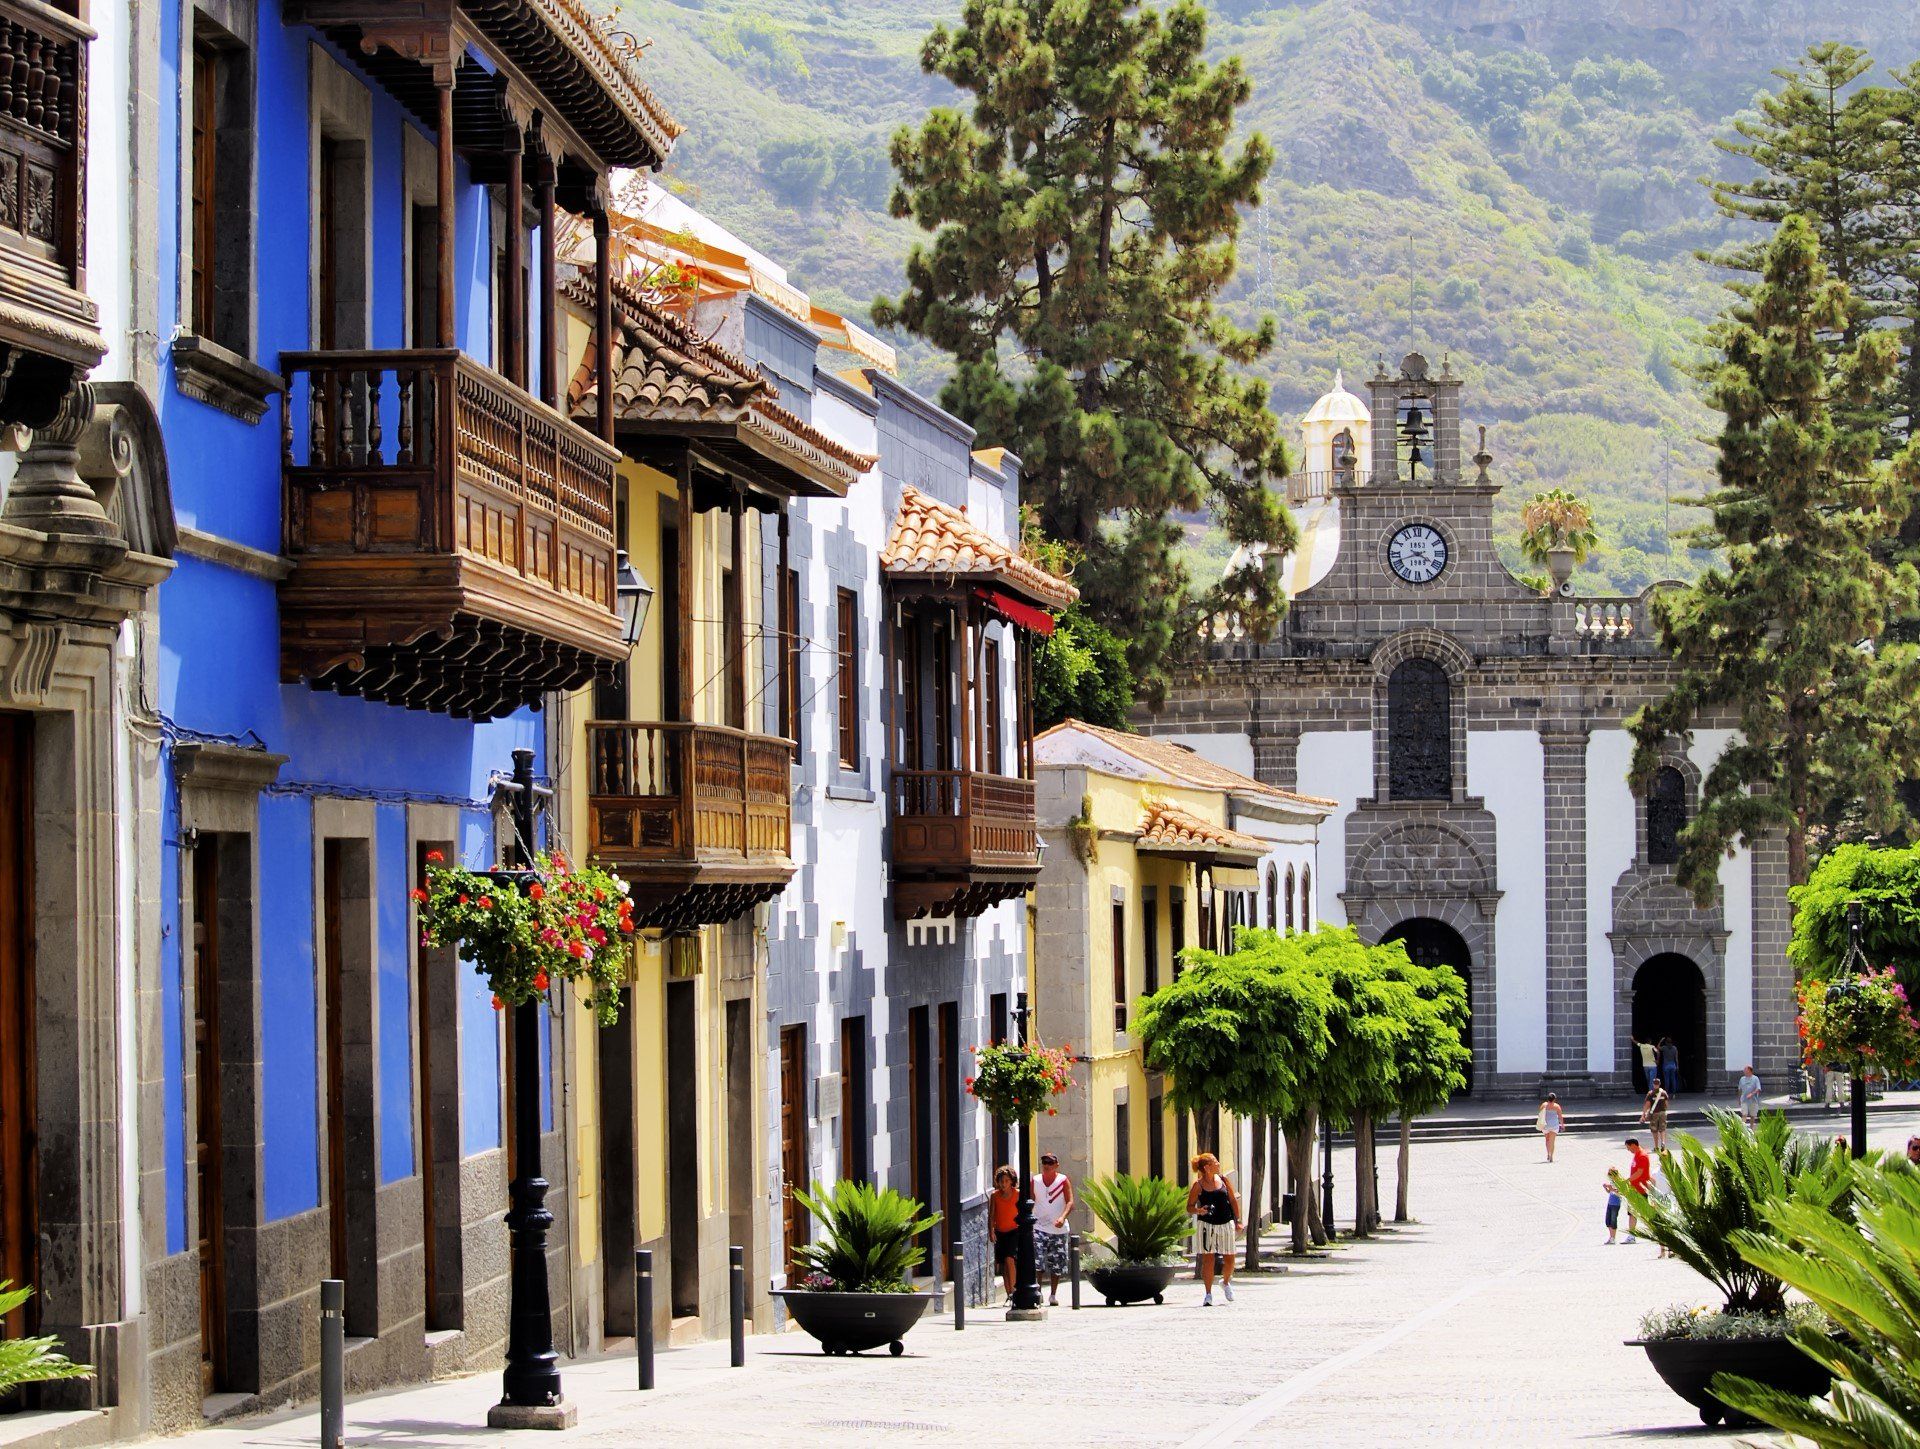 The charming old town Teror, northern Gran Canaria